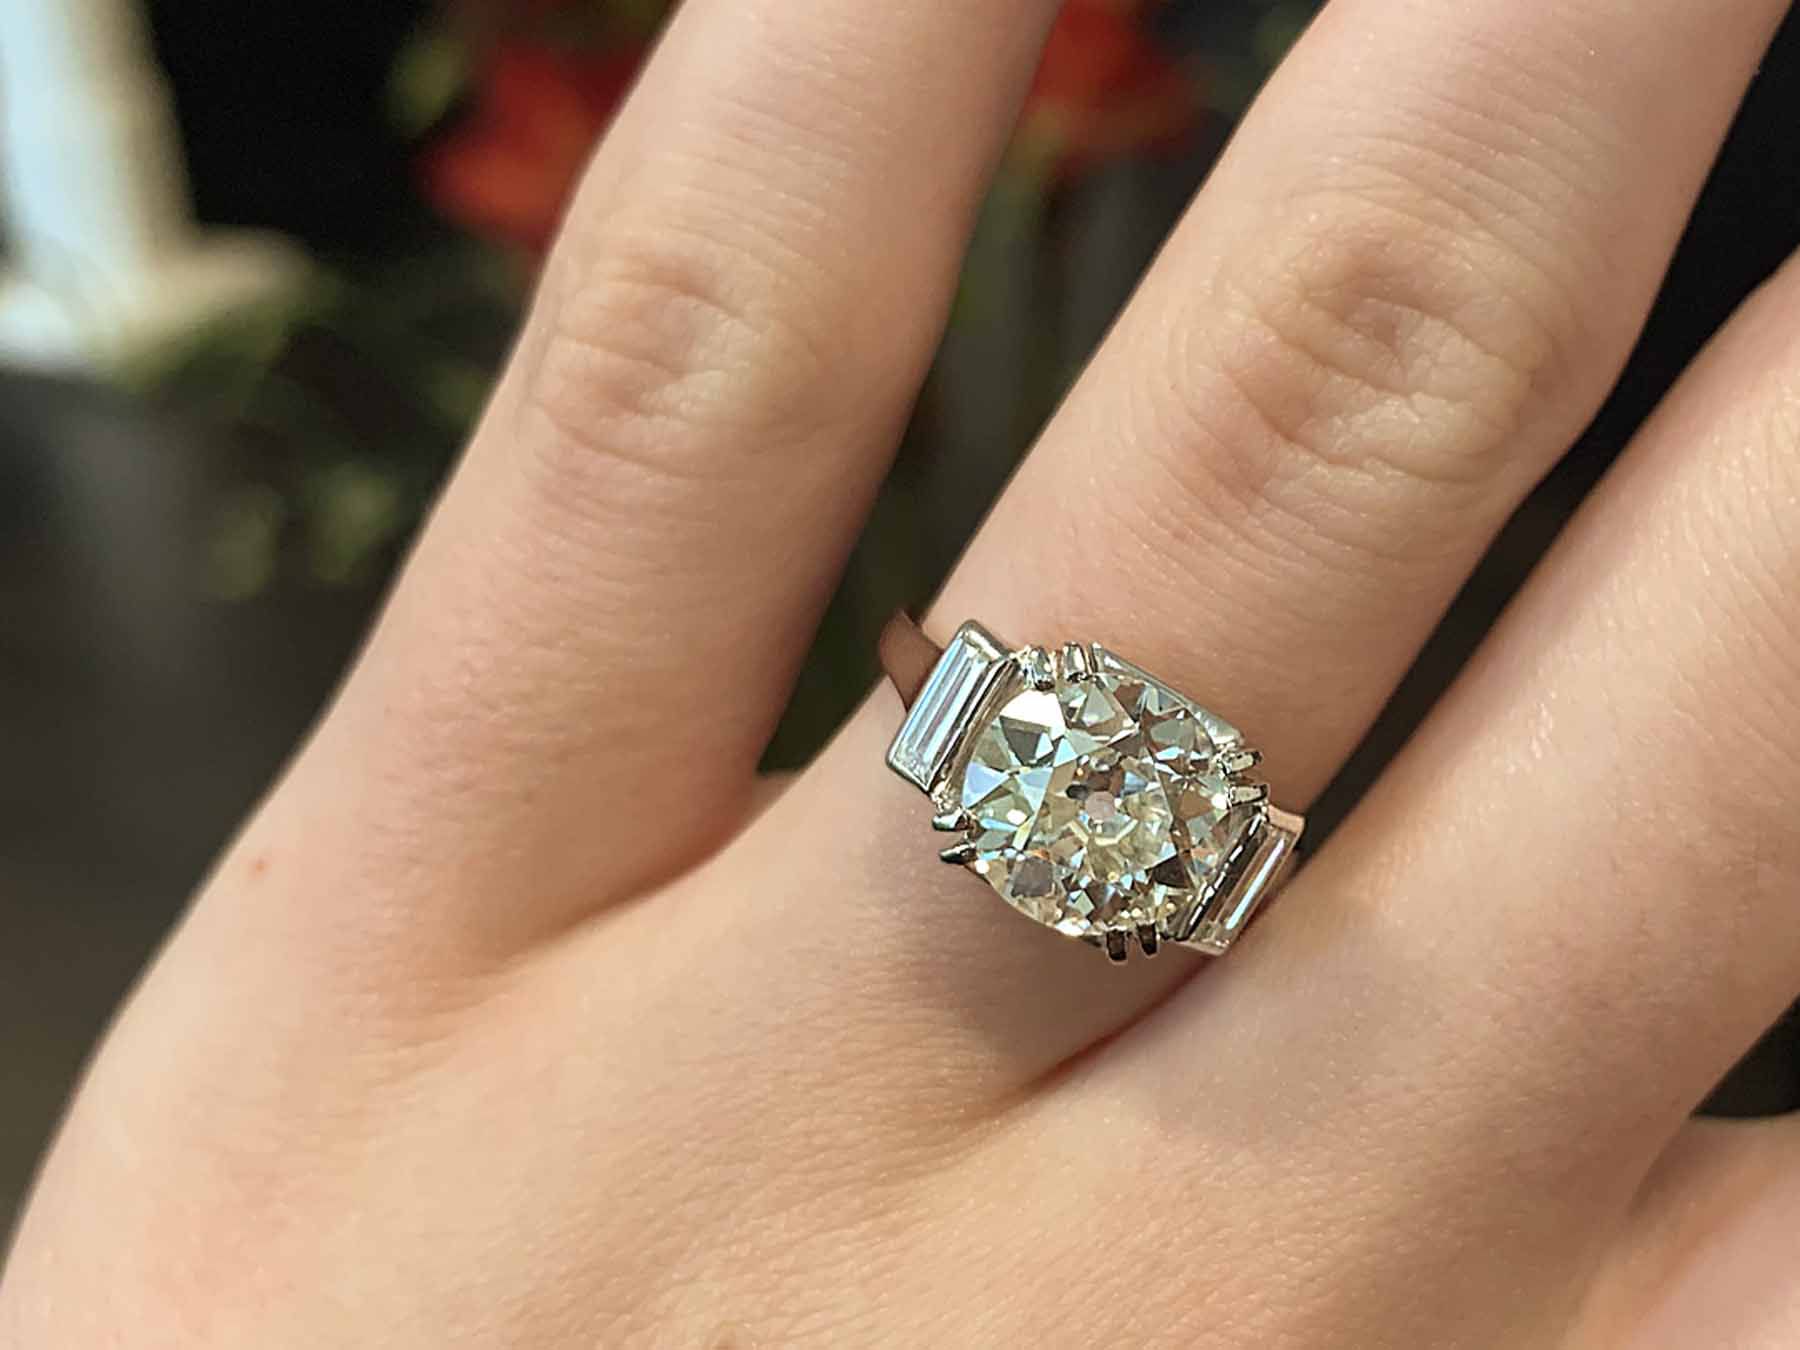 When you should take off your engagement ring